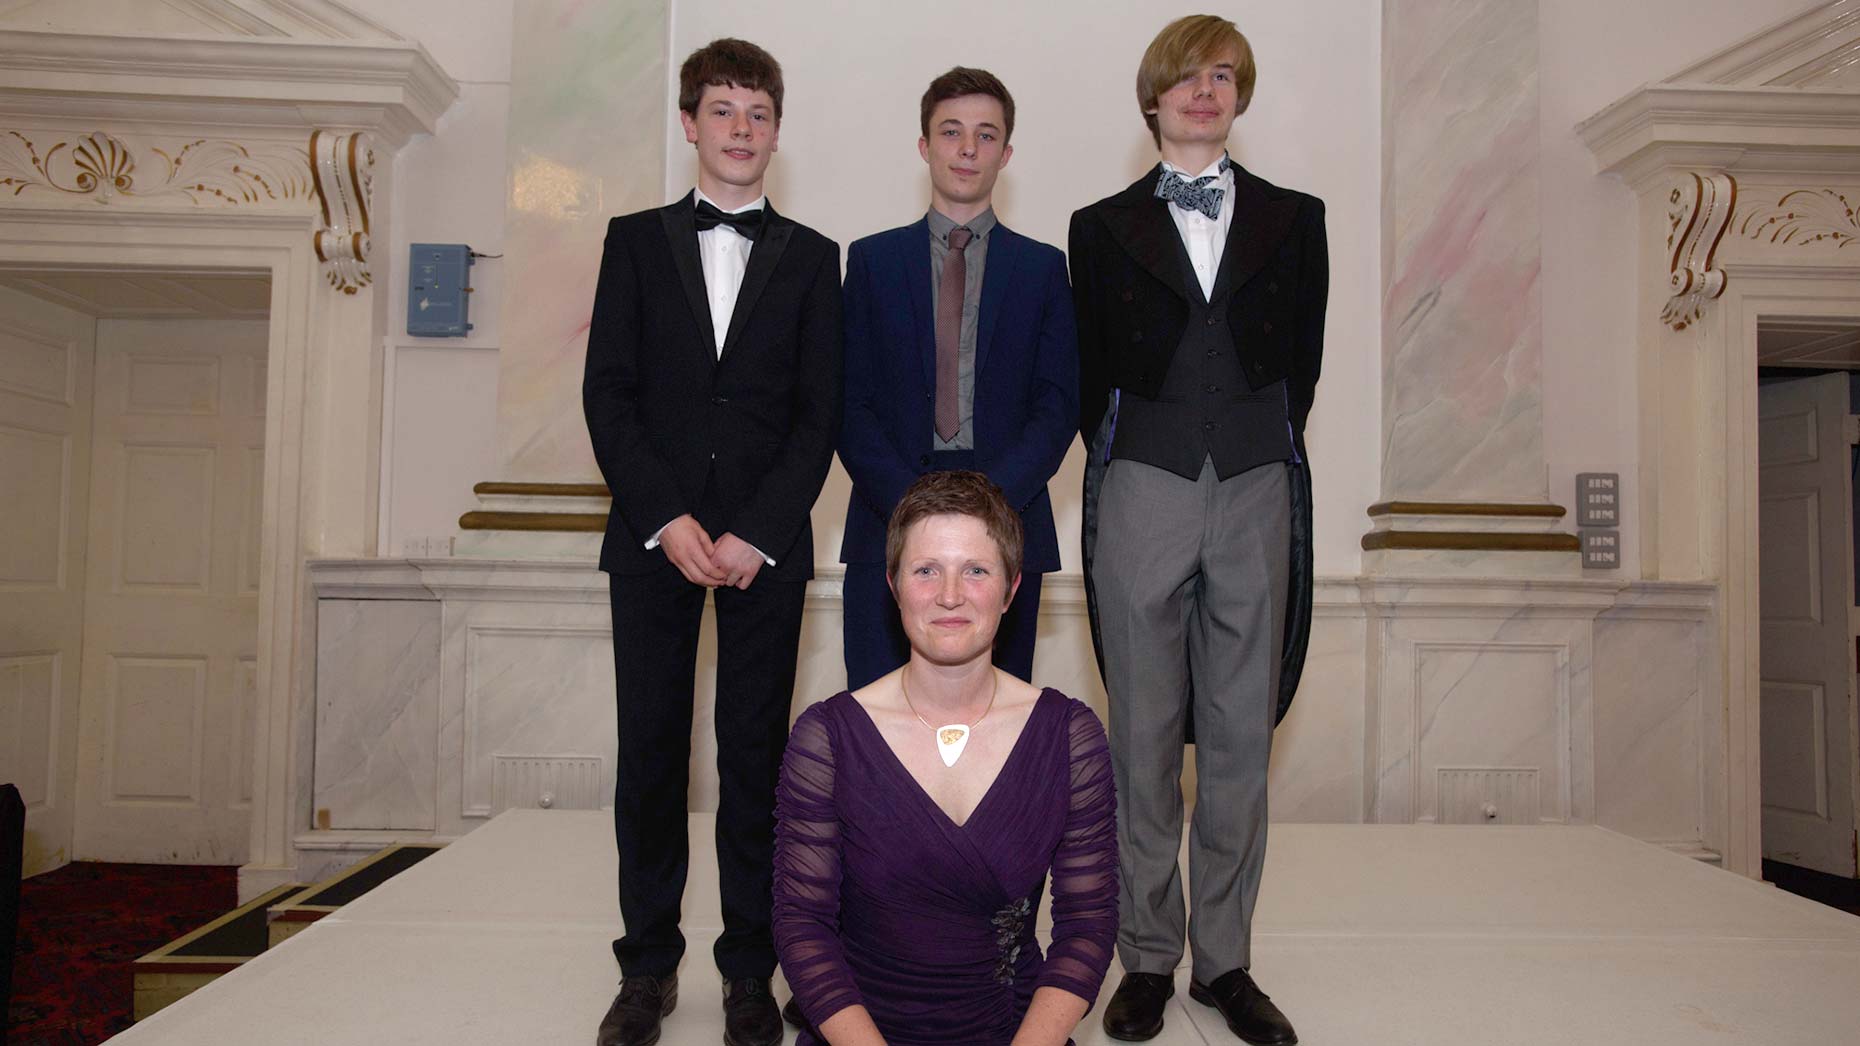 Students Ralph Oscar Reader-Sullivan, Henry Barker and Theo Drabble with UTC Principal Rona Mackenzie. Photo: Steve Smailes for The Lincolnite